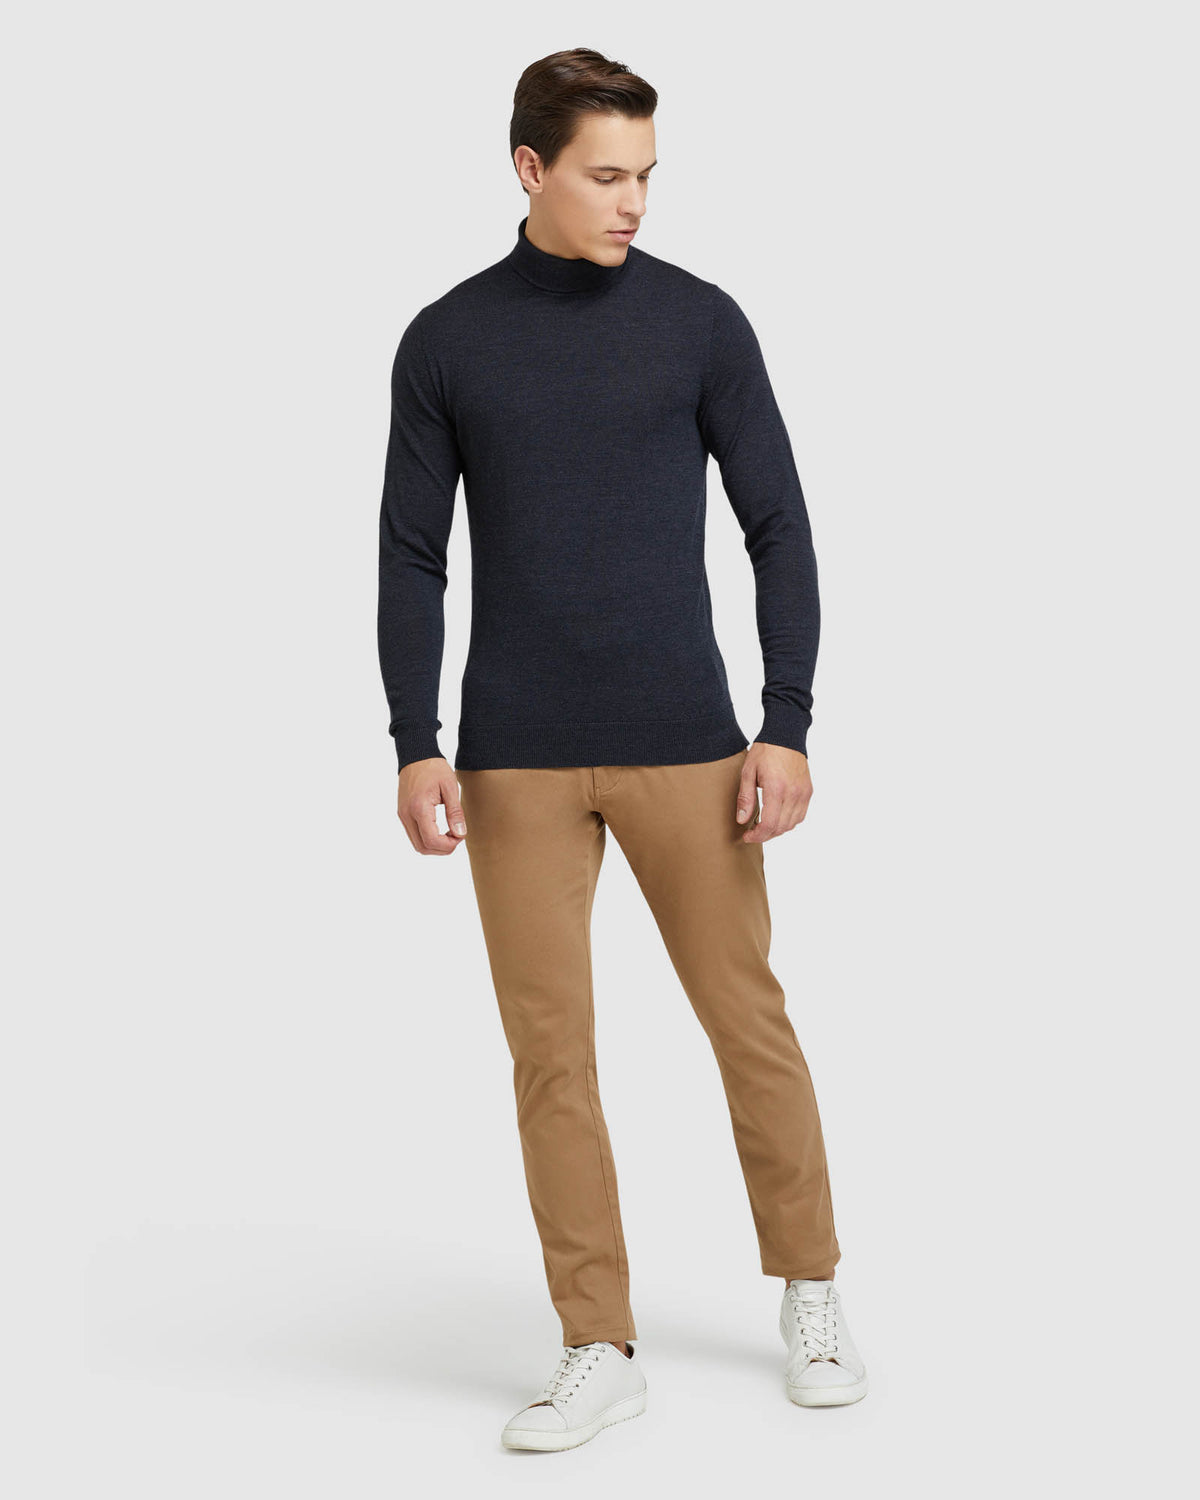 AARON TURTLE NECK PURE WOOL KNIT